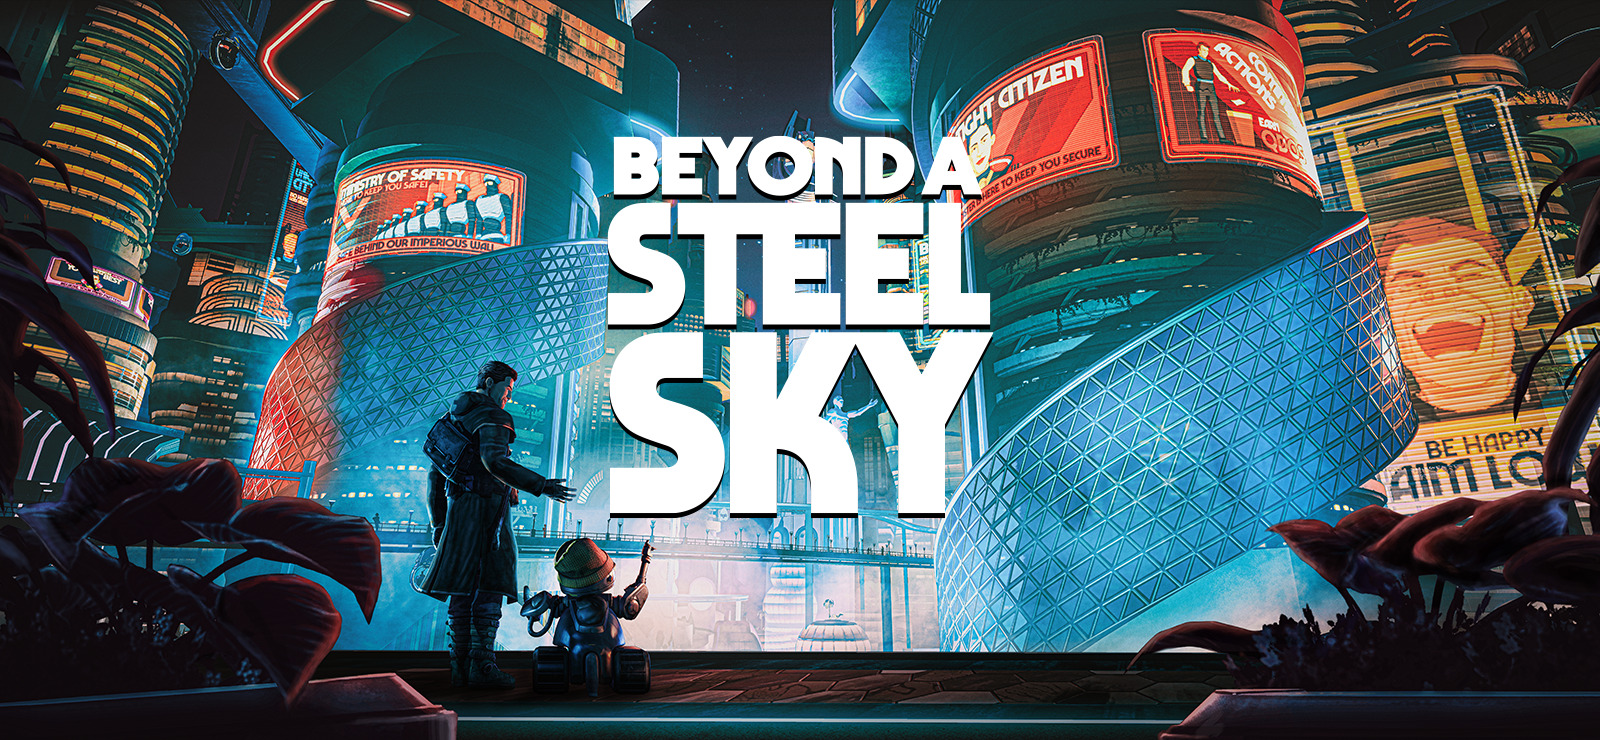 download beyond a steel sky pc